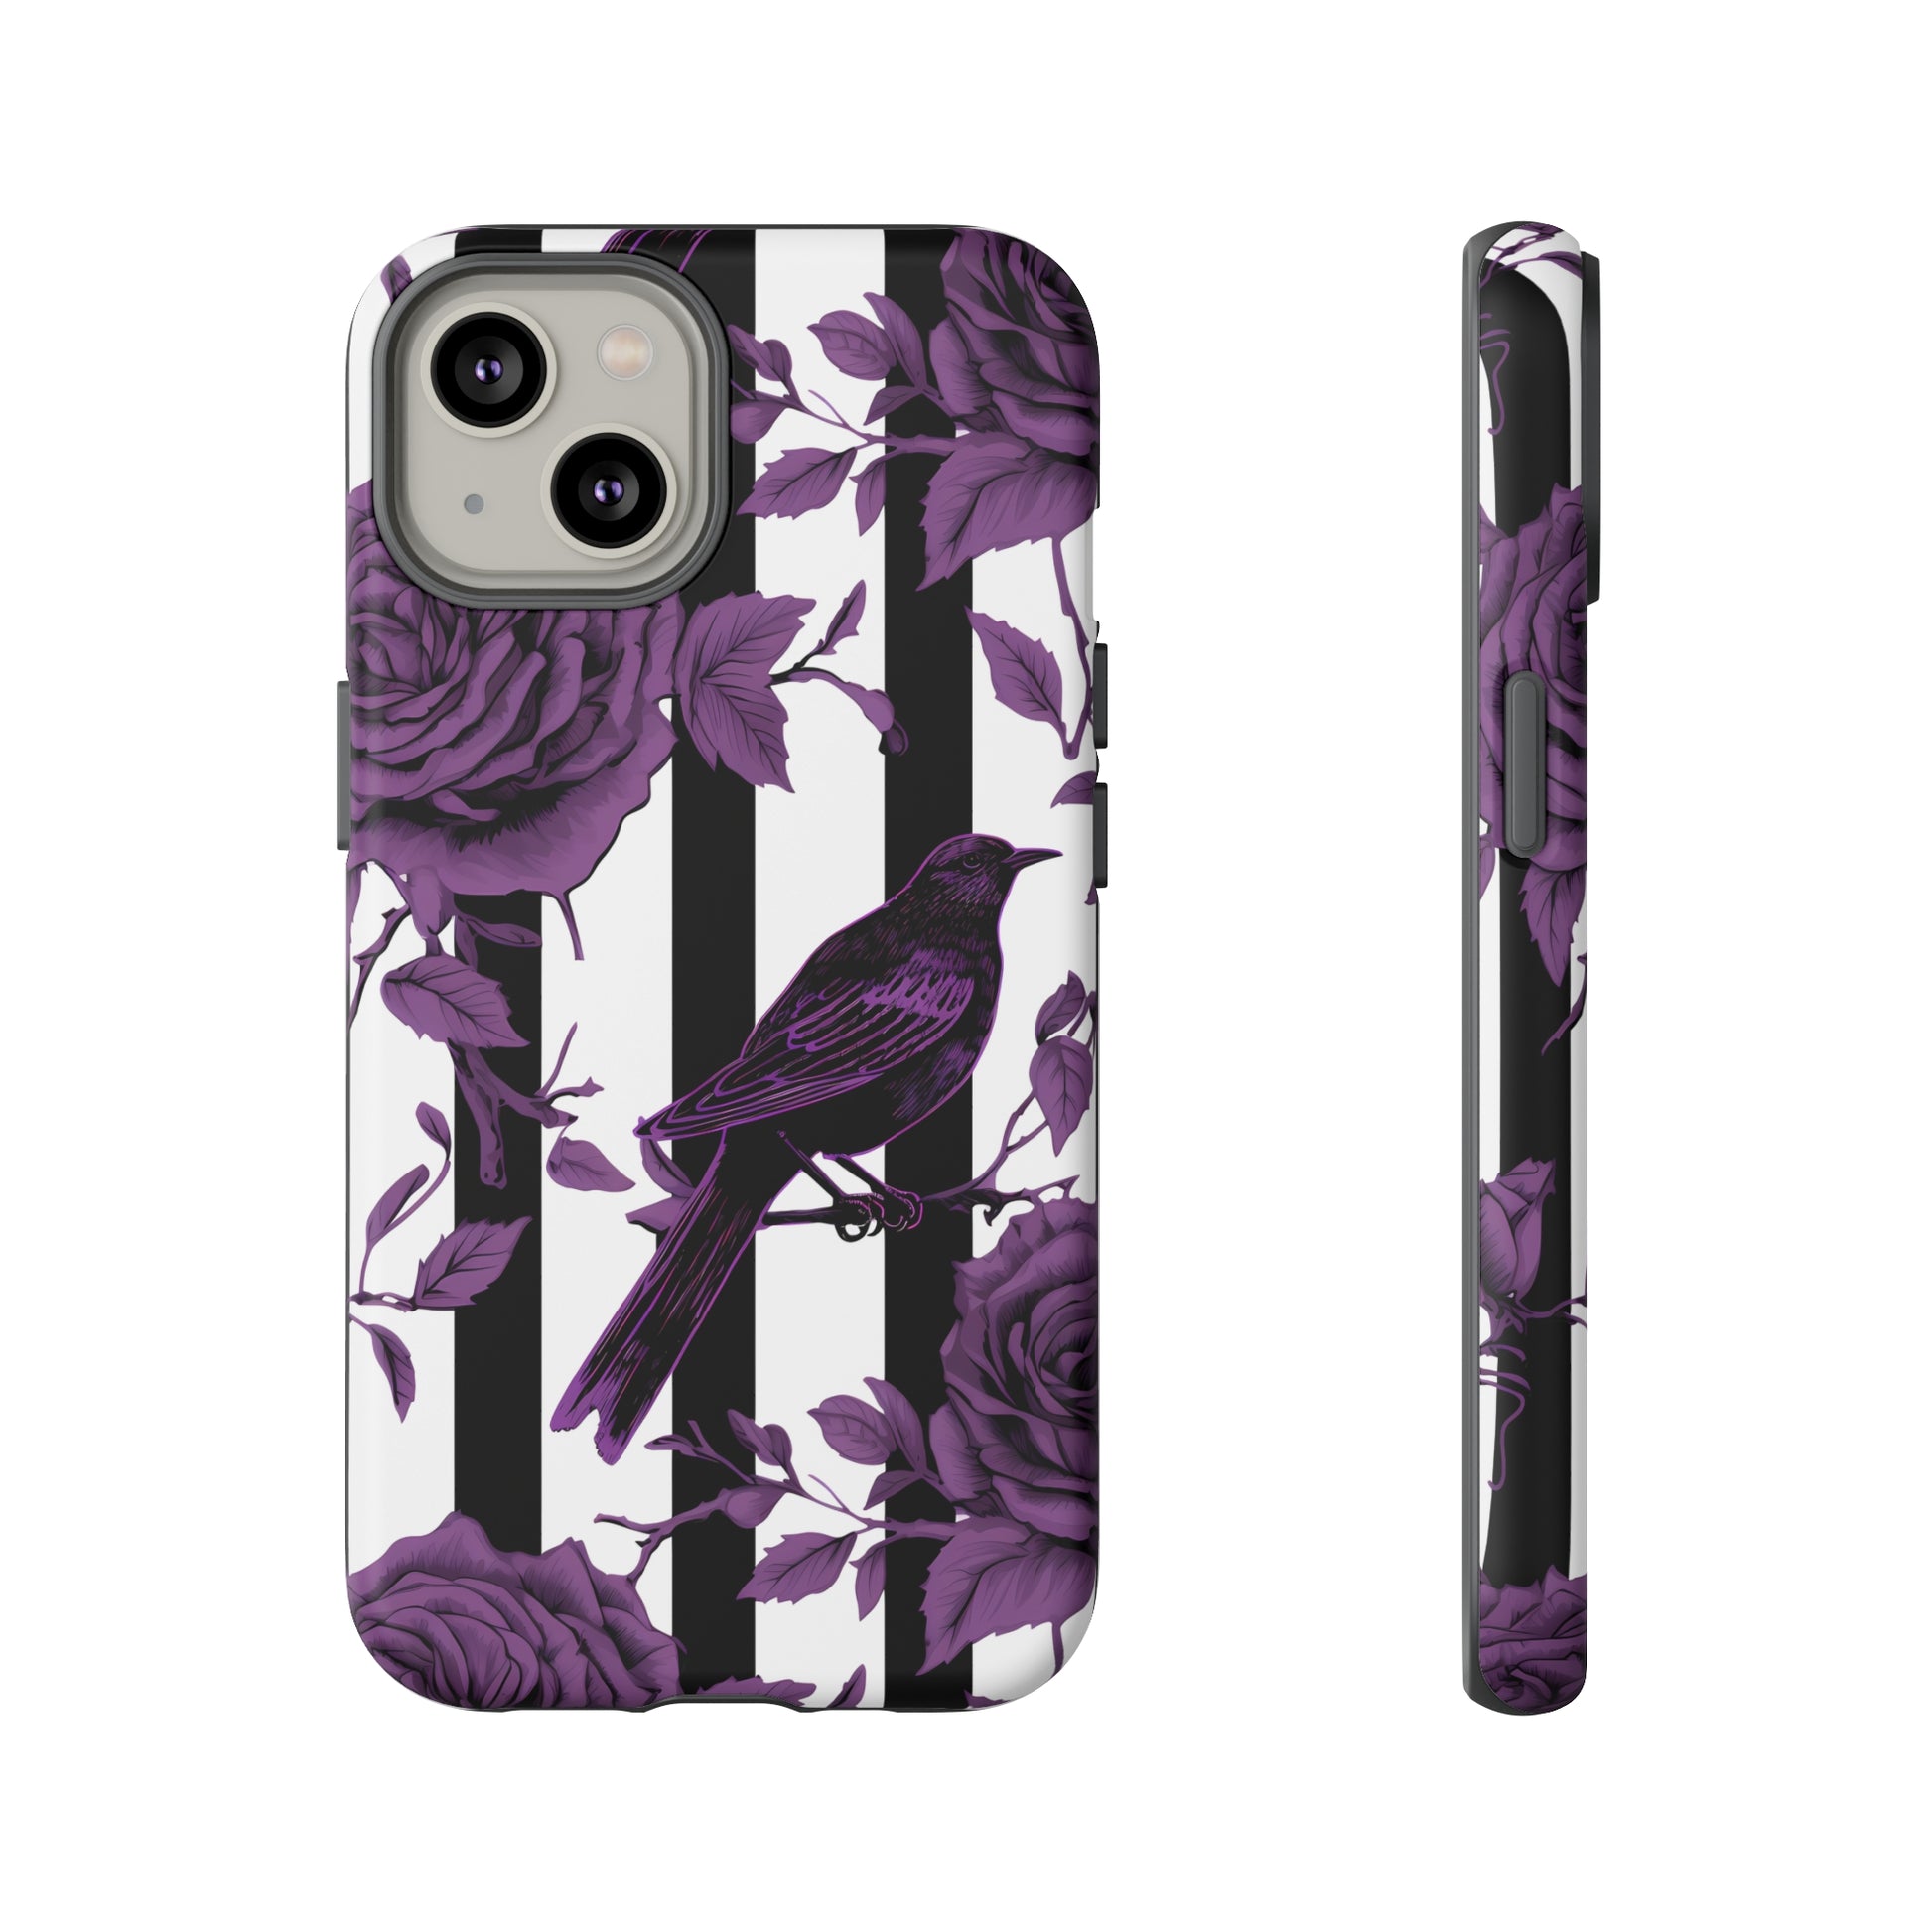 Striped Crows and Roses Tough Cases for iPhone Samsung Google PhonesPhone CaseVTZdesignsiPhone 14MatteAccessoriescrowsGlossy